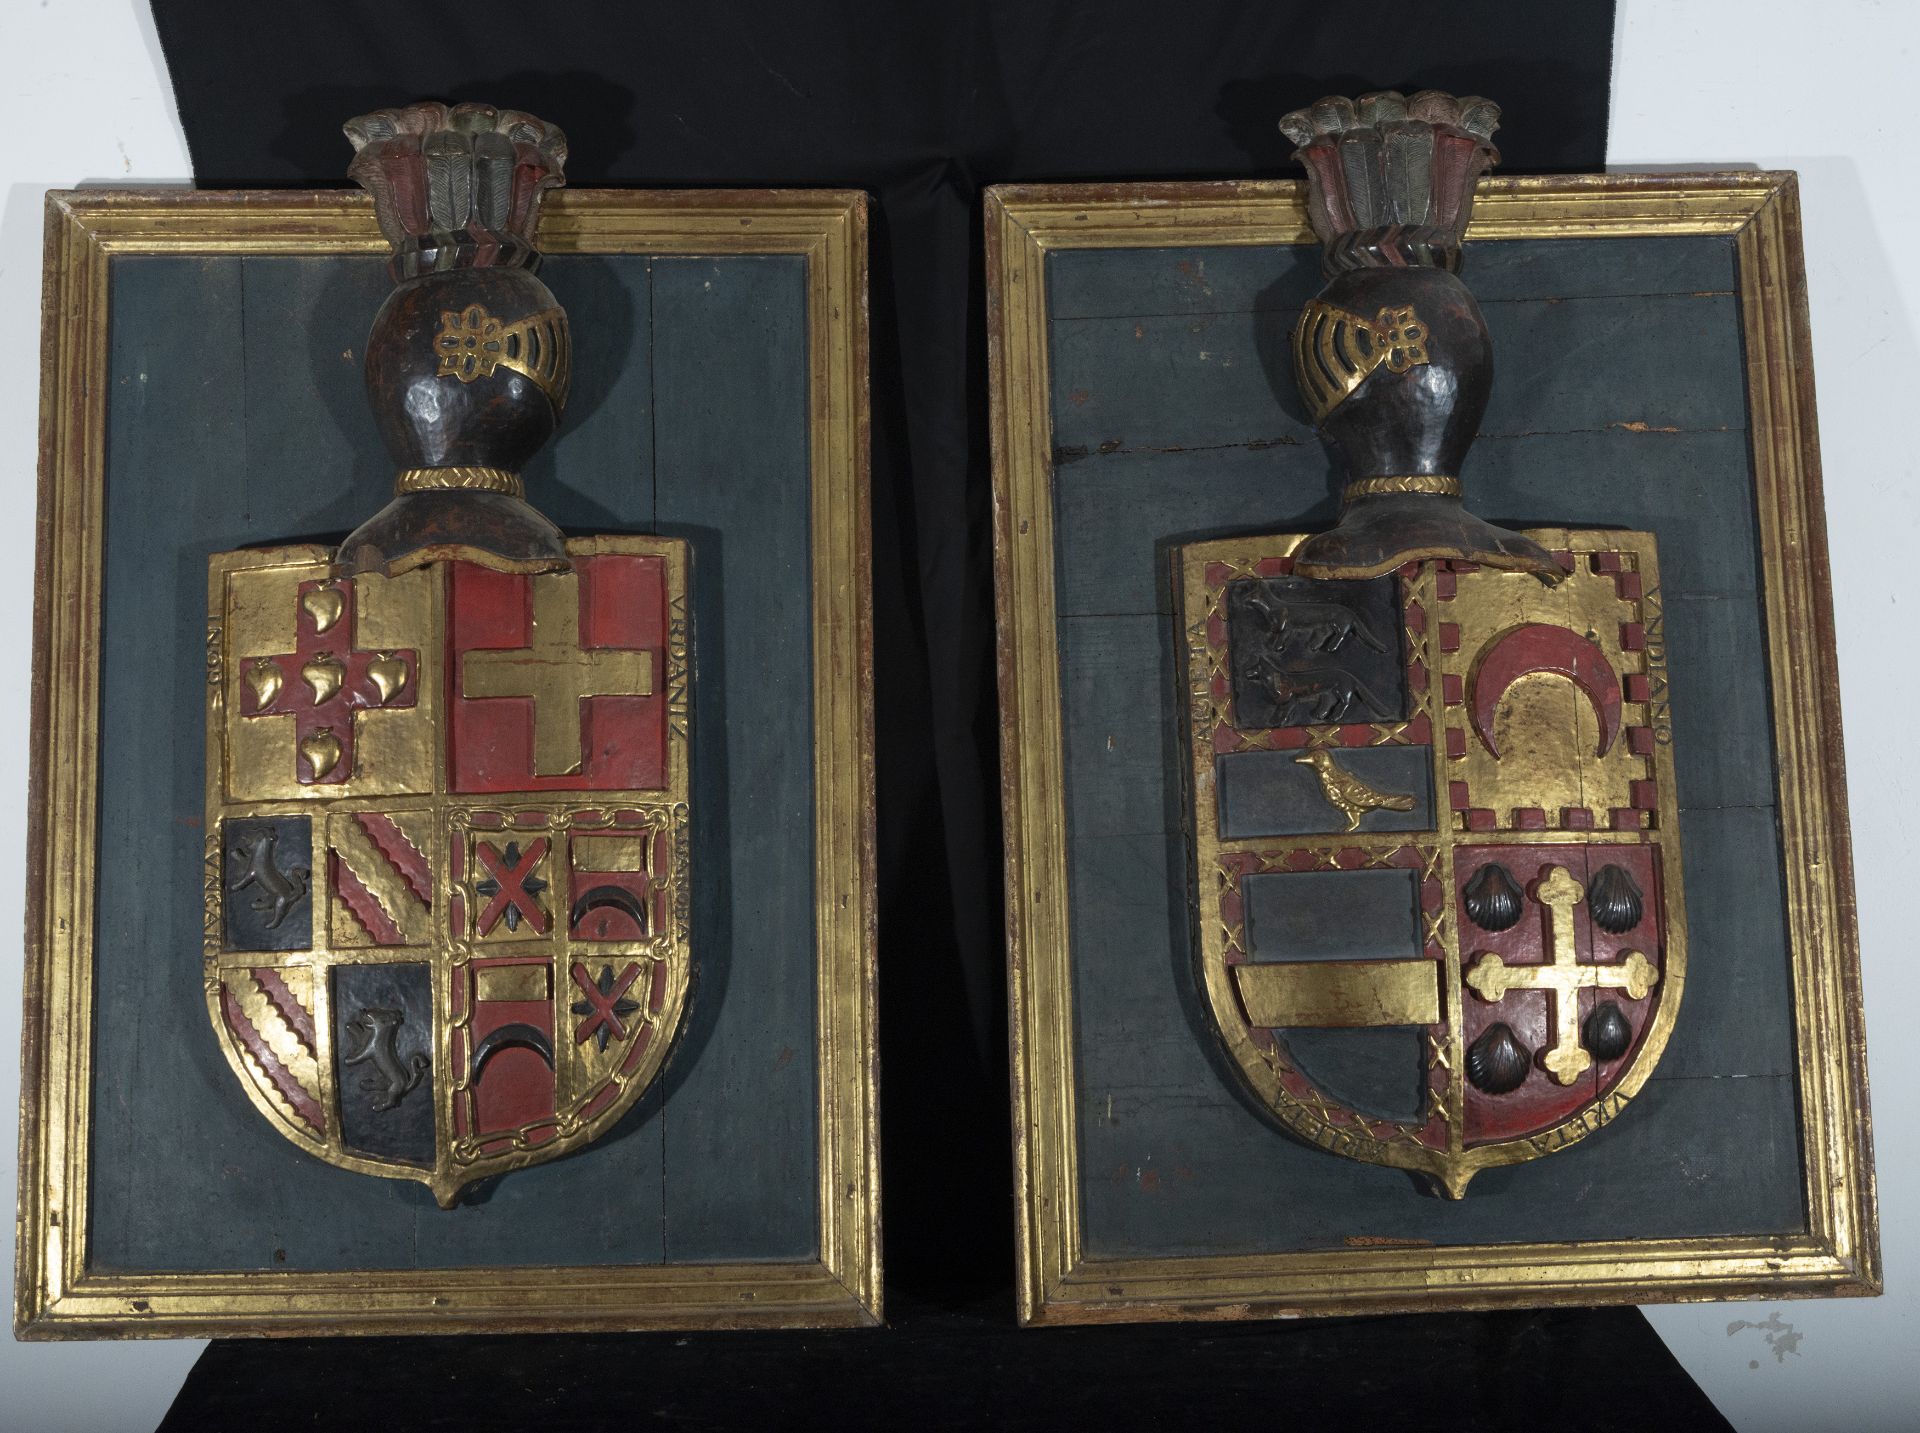 Pair of Large Noble Heraldic Shields in Renaissance carved wood, Spain or Portugal 16th century - ea